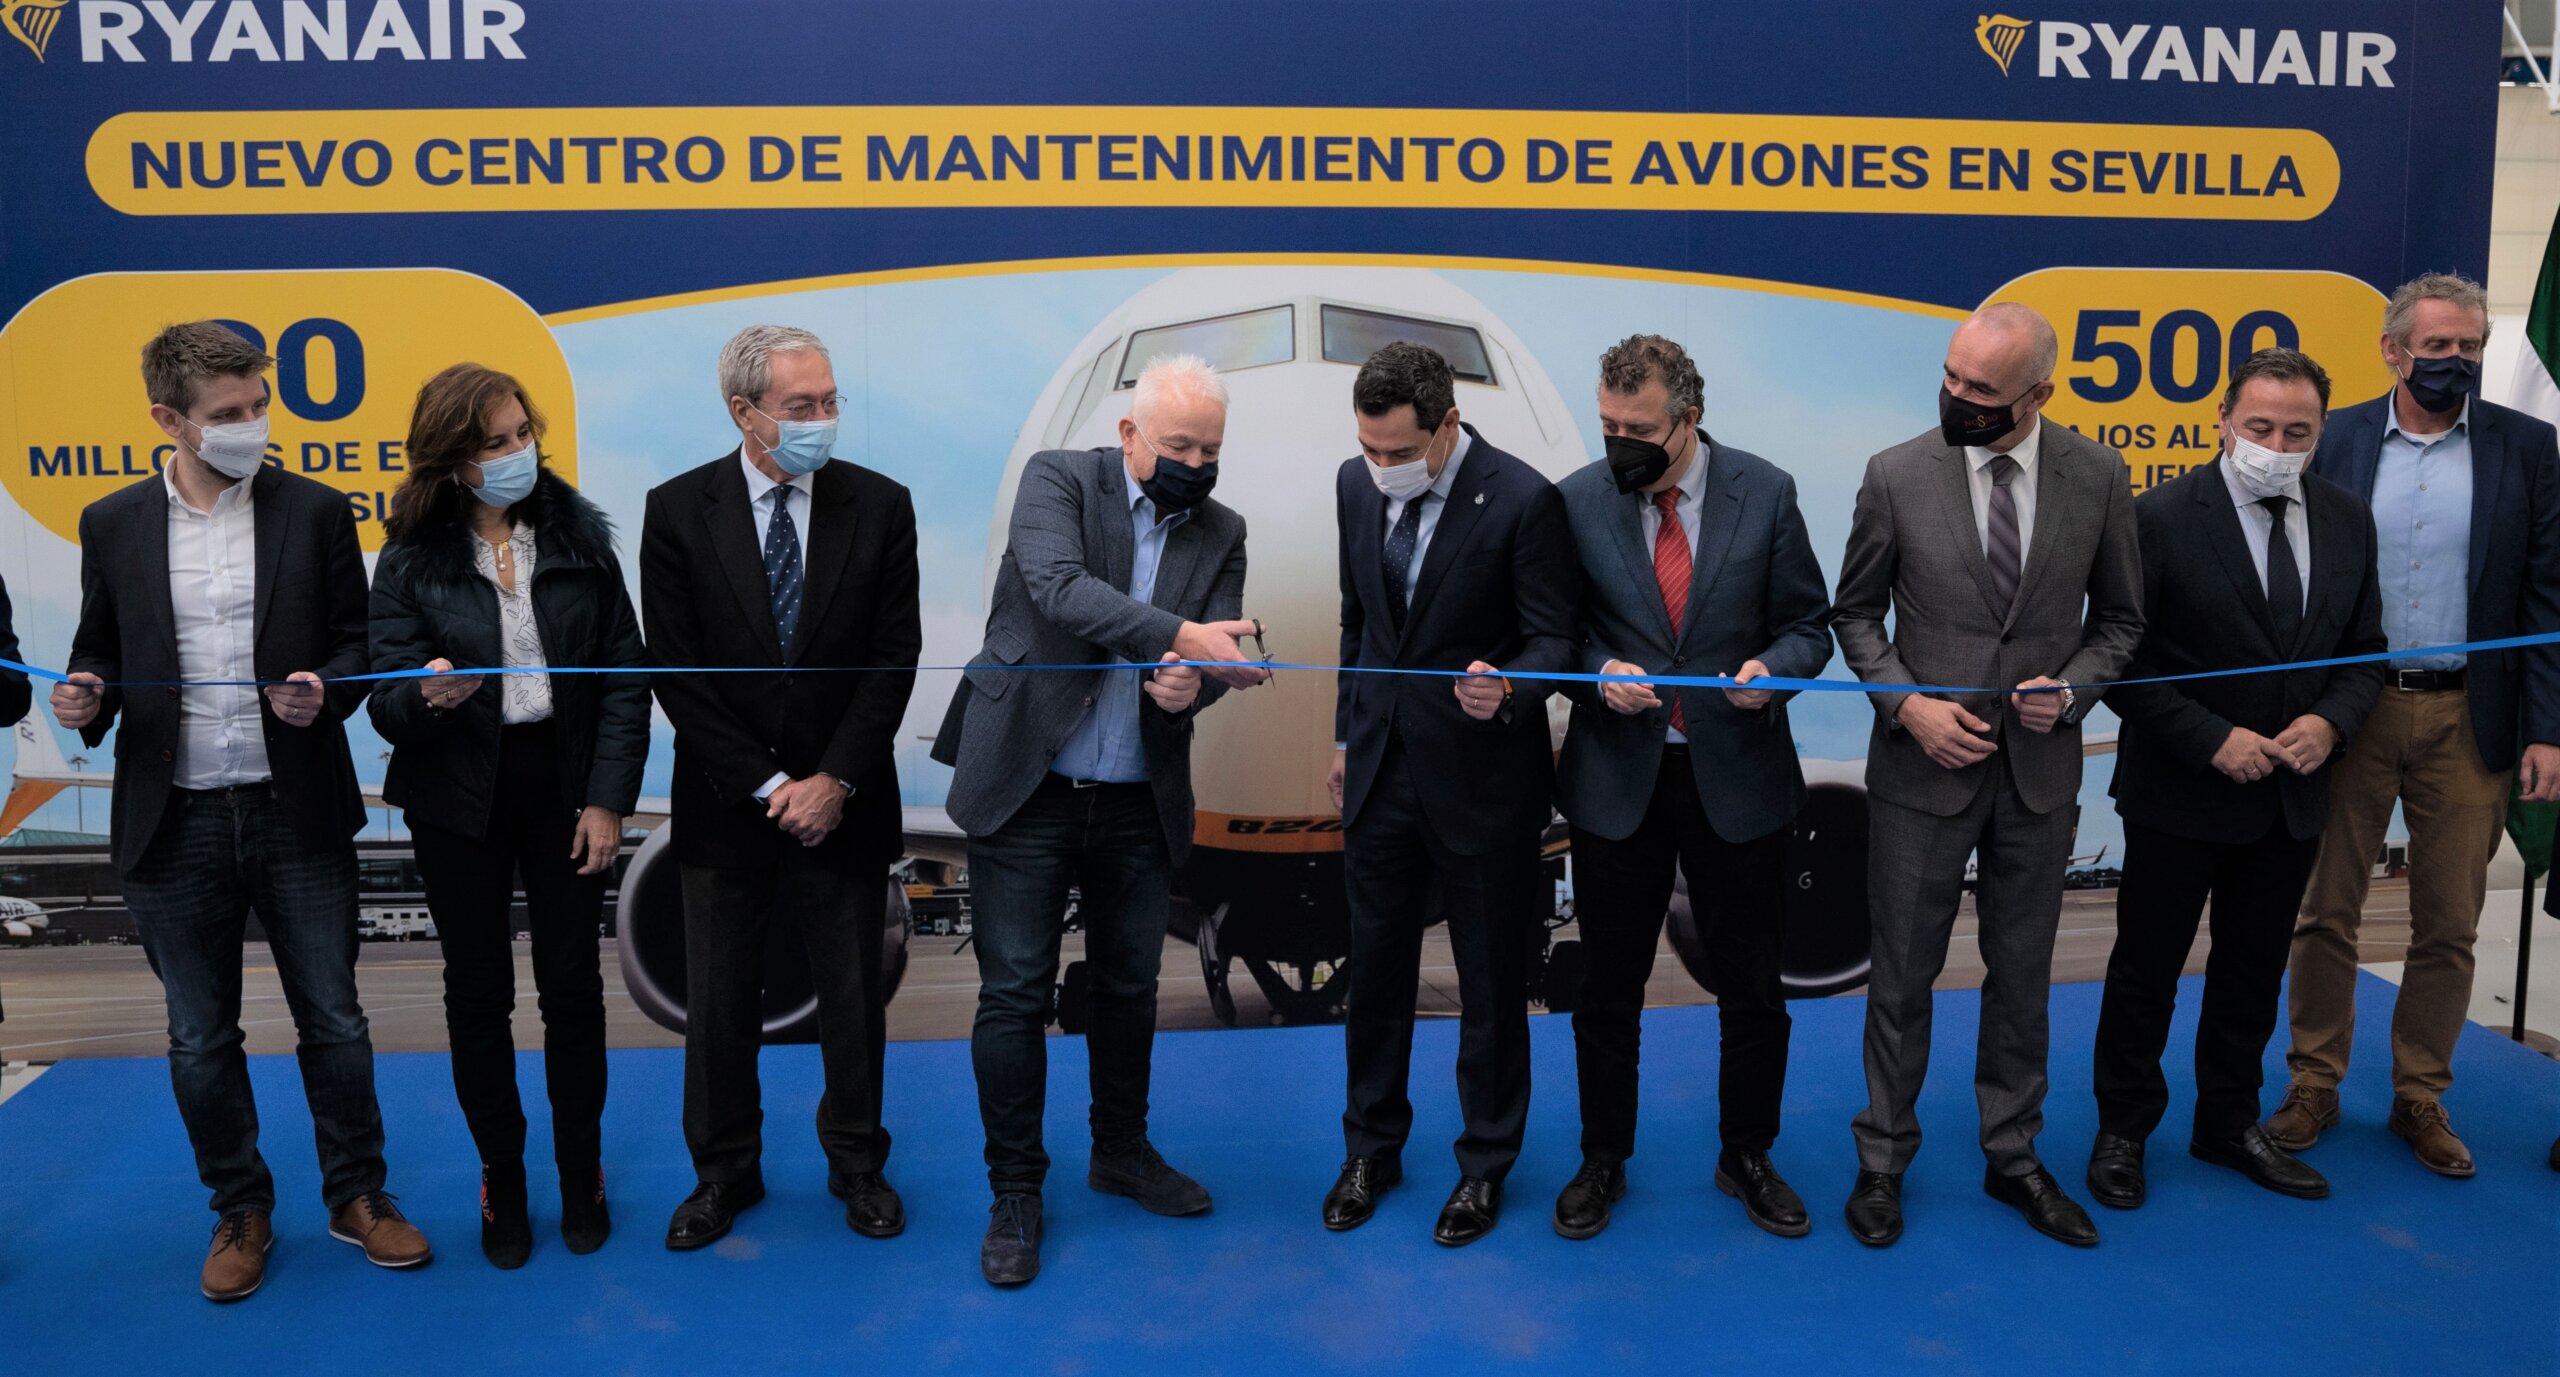 Ryanair Opens New Aircraft Maintenance Facility In Seville